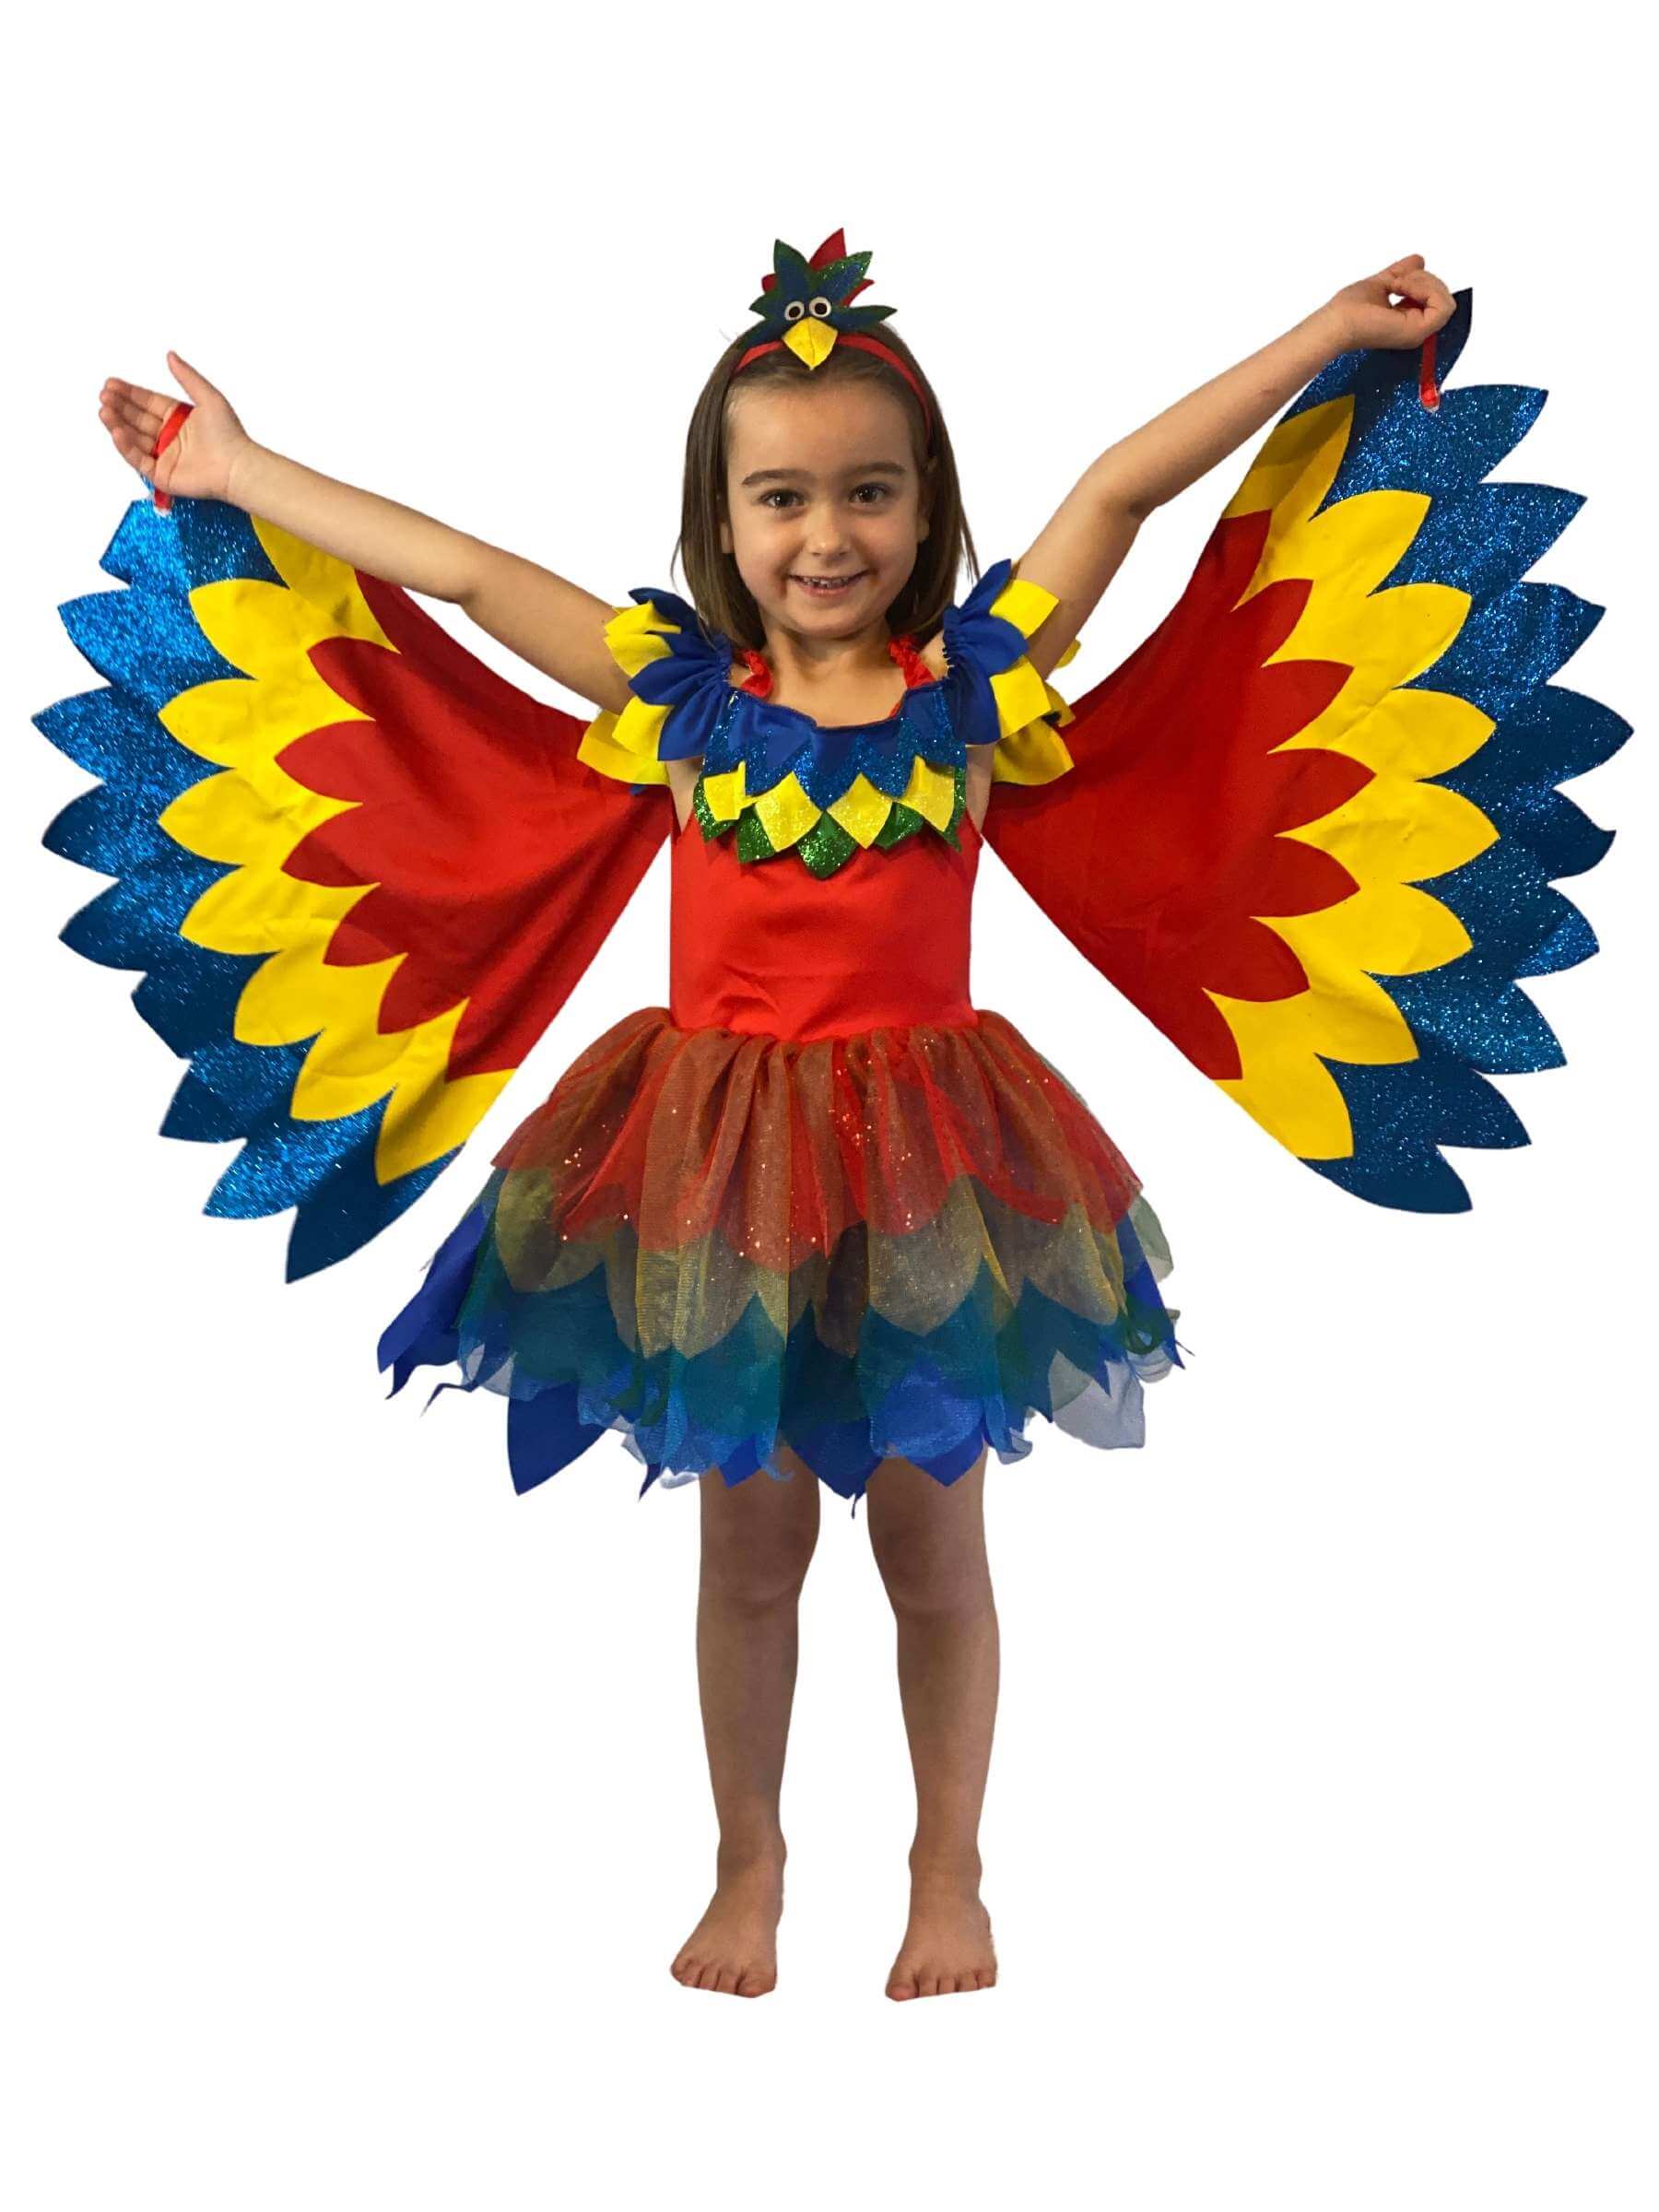 Girl wearing a red, yellow and blue macaw parrot Costume. With her arms stretched out showing the wings that attach to her wrists.